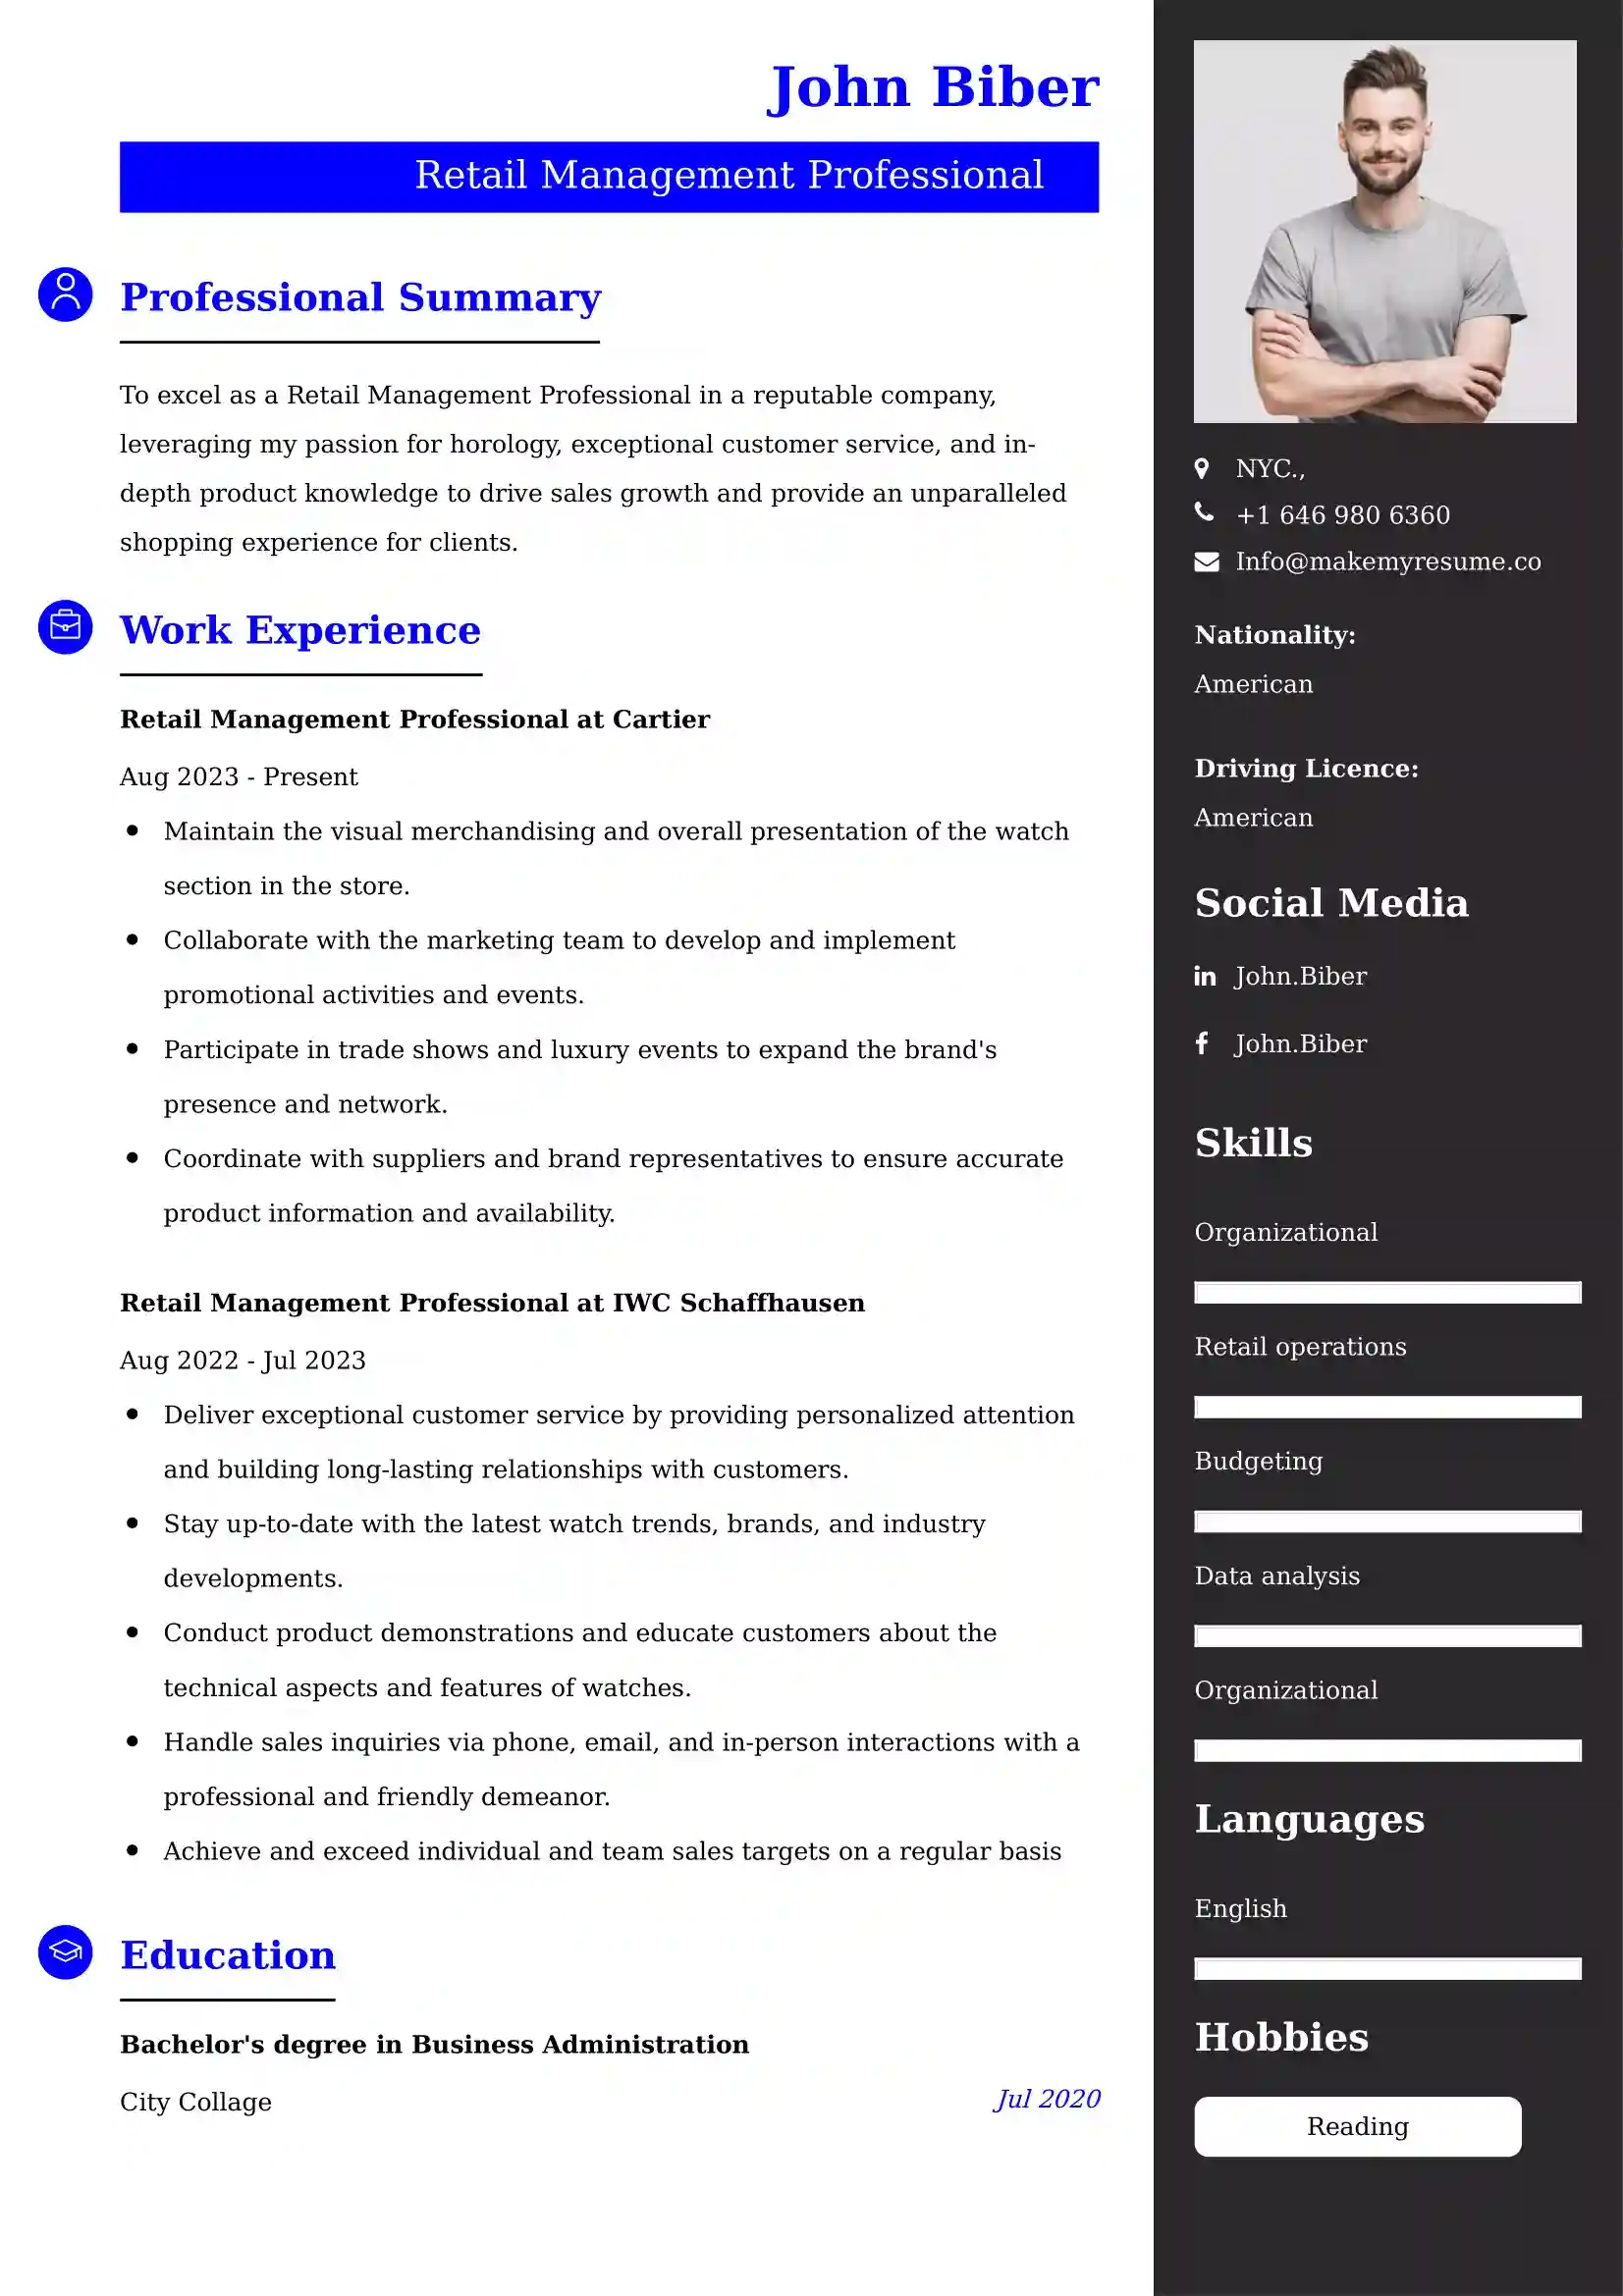 Best Retail Management Professional Resume Examples for UK